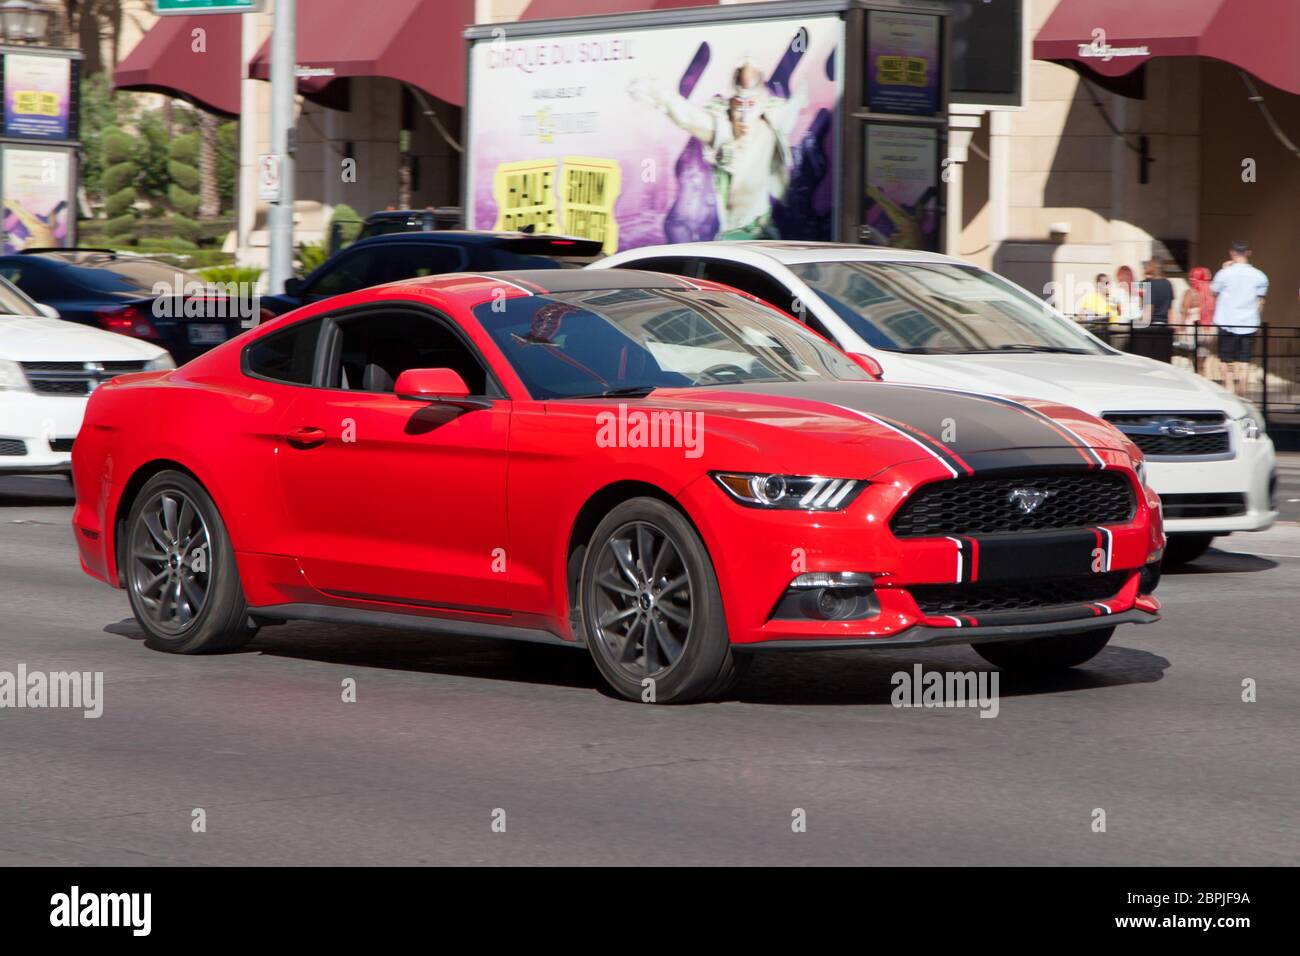 Las Vegas, Nevada - August 30, 2019: 2015 Ford Mustang GT Red W/Black Stripes in Las Vegas, Nevada, United States. Stock Photo